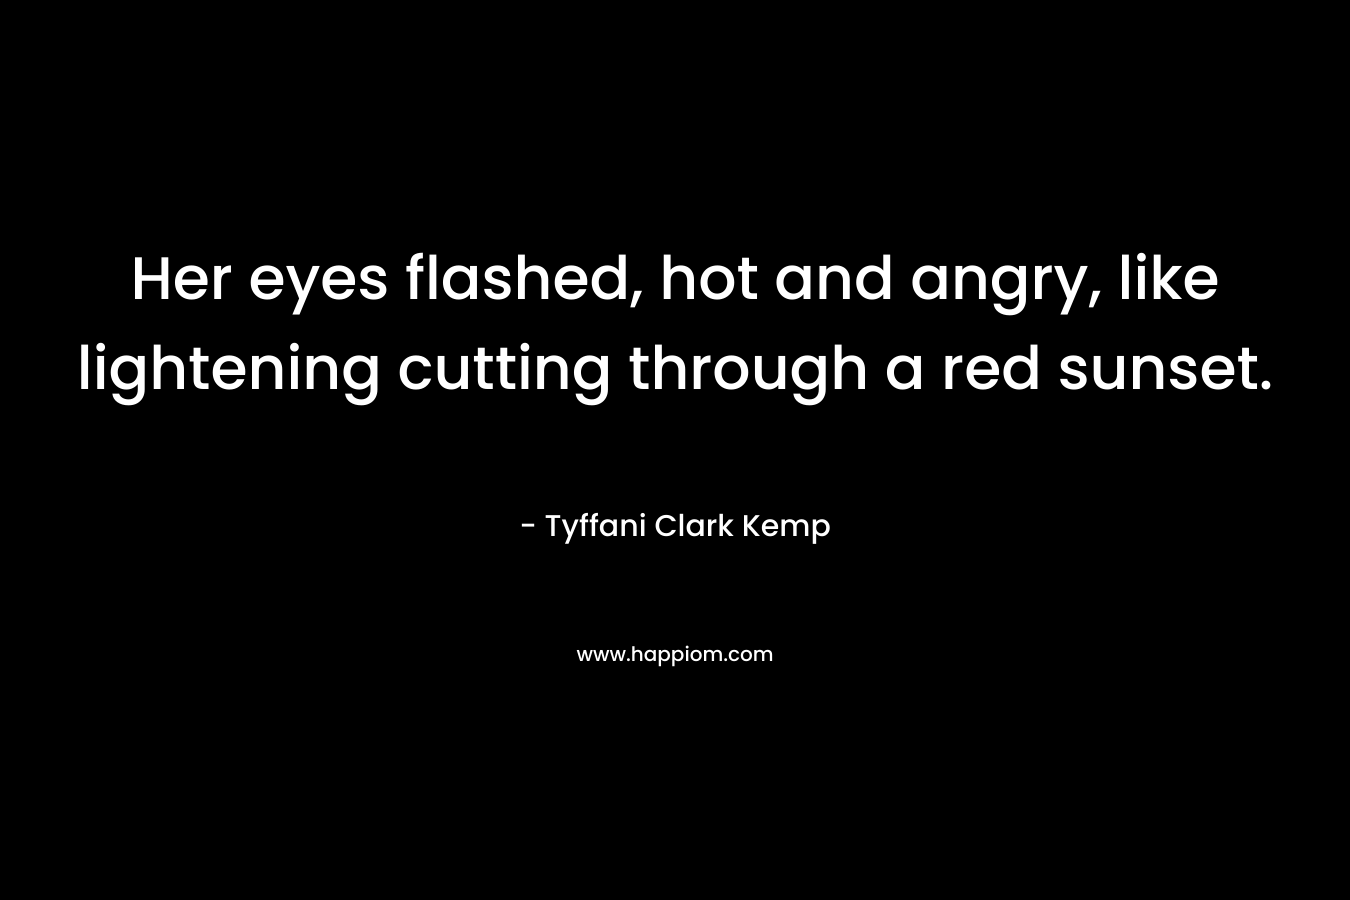 Her eyes flashed, hot and angry, like lightening cutting through a red sunset. – Tyffani Clark Kemp